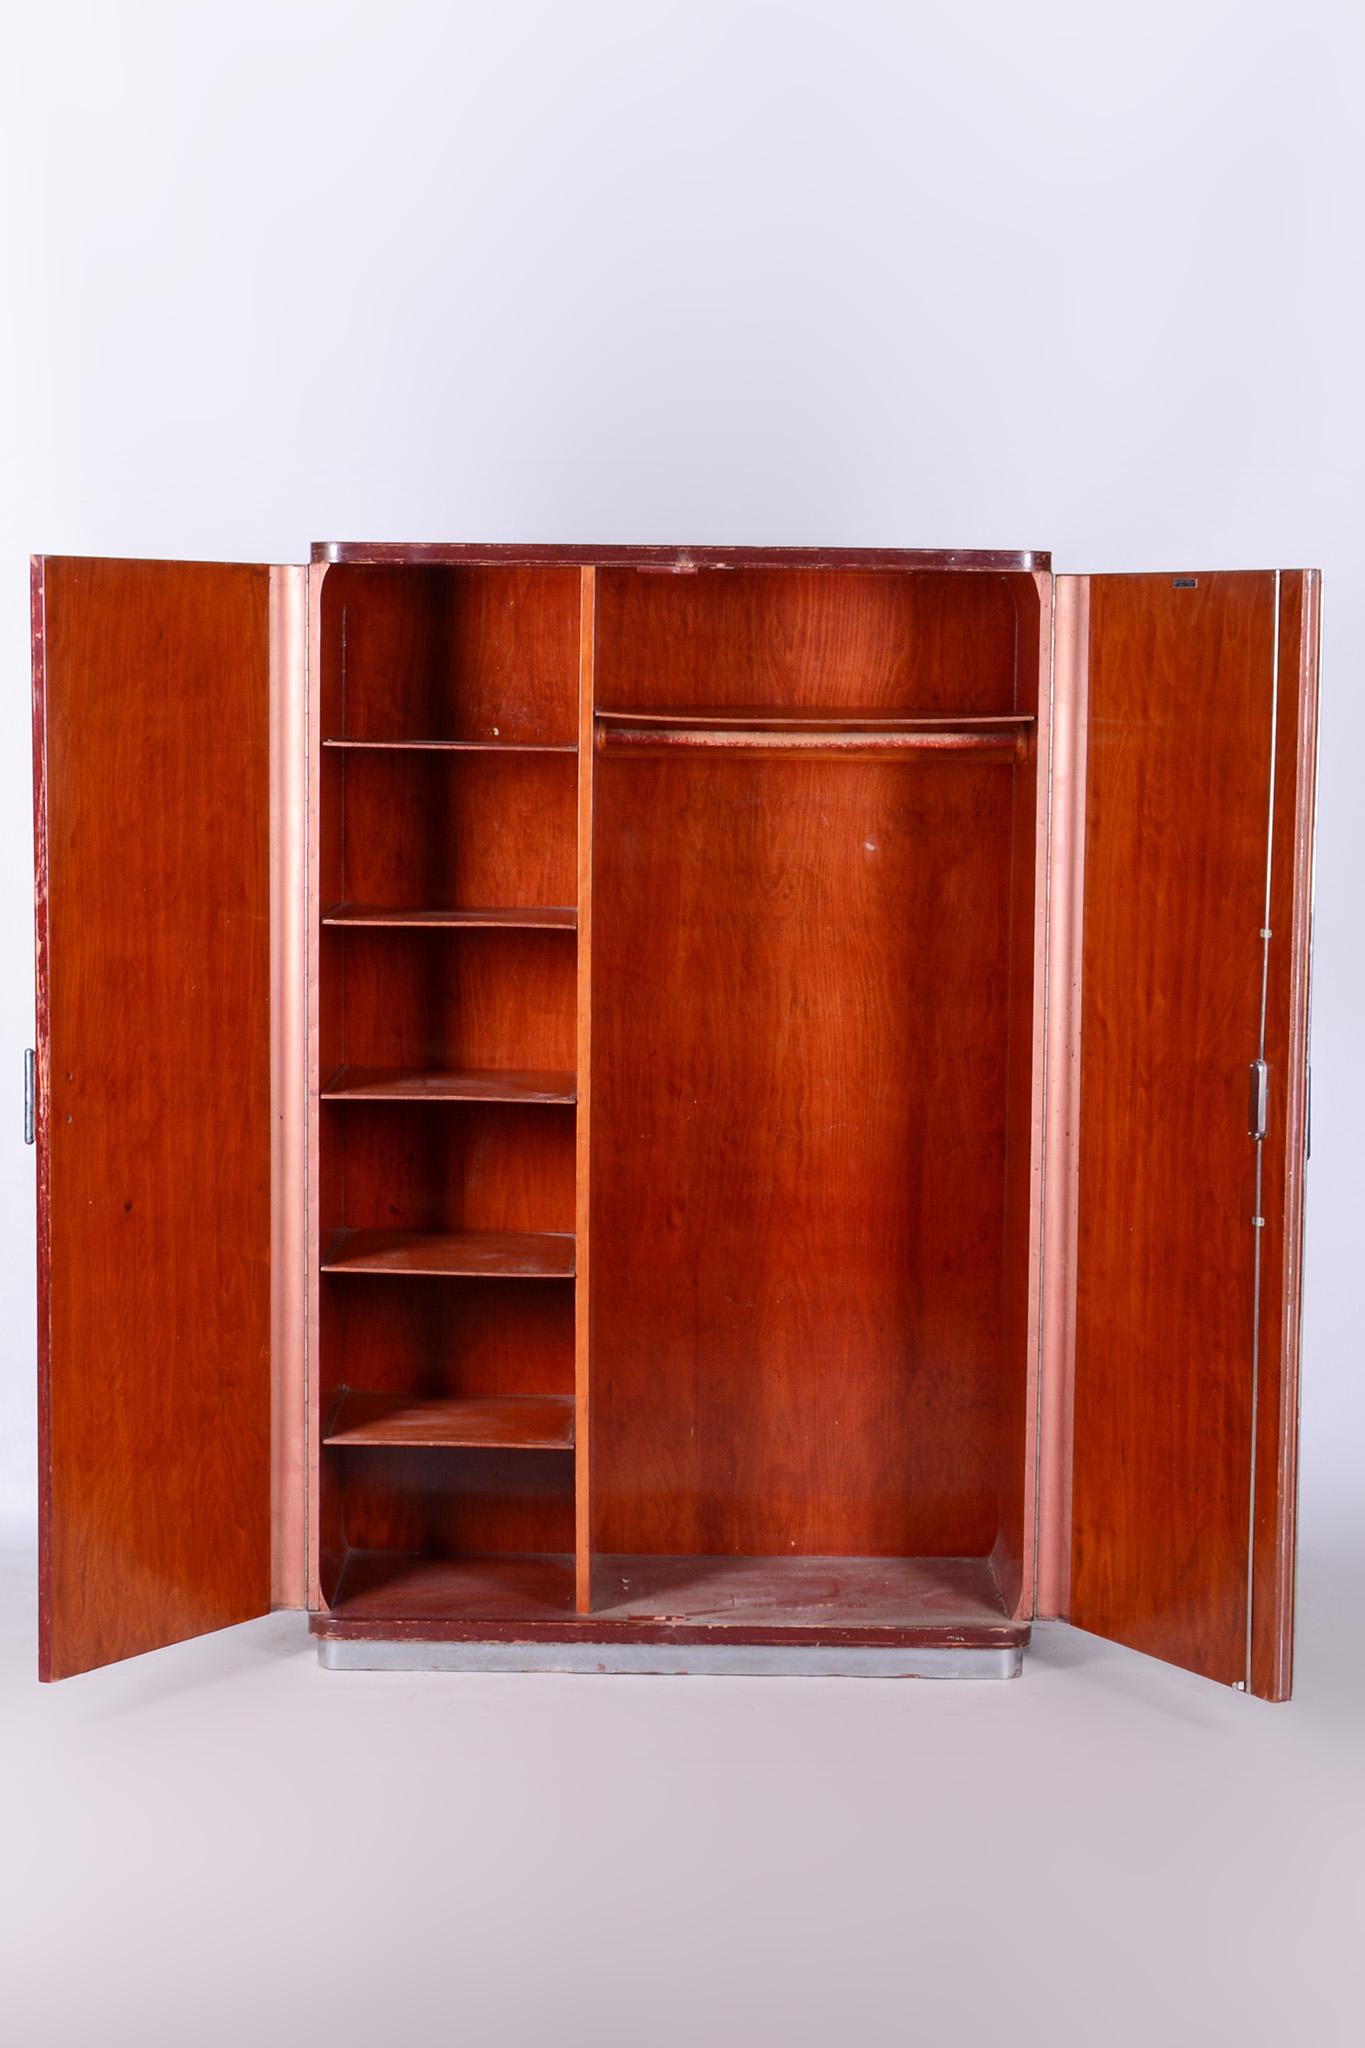 Walnut Bauhaus Wardrobe Made in Czechia by Vichr a Spol, 1930-1939 In Good Condition For Sale In Horomerice, CZ